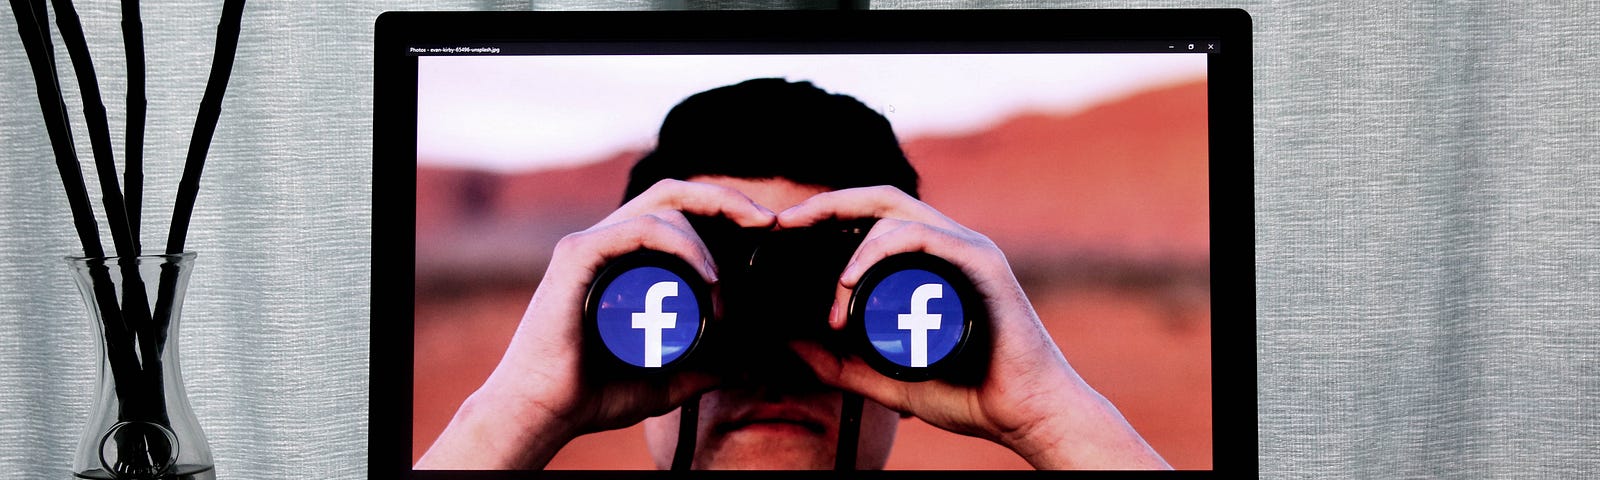 Computer screen with man looking through binoculars at you. The binoculars have Facebook’s logo on the lens pieces as if to suggest Facebook is watching you.